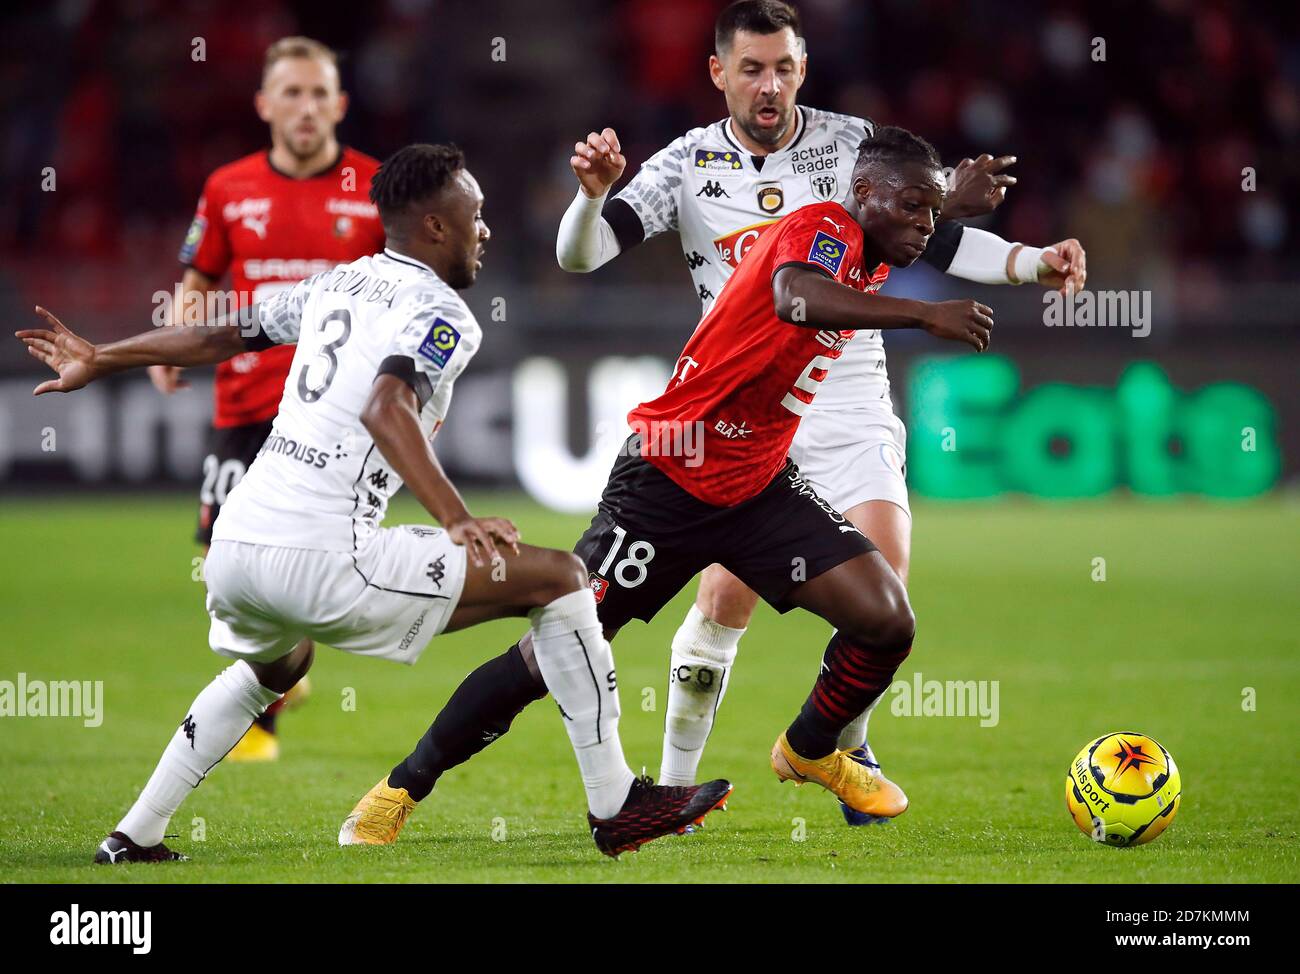 Soccer Football - Ligue 1 - Stade Rennes v Angers - Roazhon Park, Rennes,  France - October 23, 2020 Stade Rennes' Jeremy Doku in action with Angers'  Souleyman Doumbia REUTERS/Stephane Mahe Stock Photo - Alamy